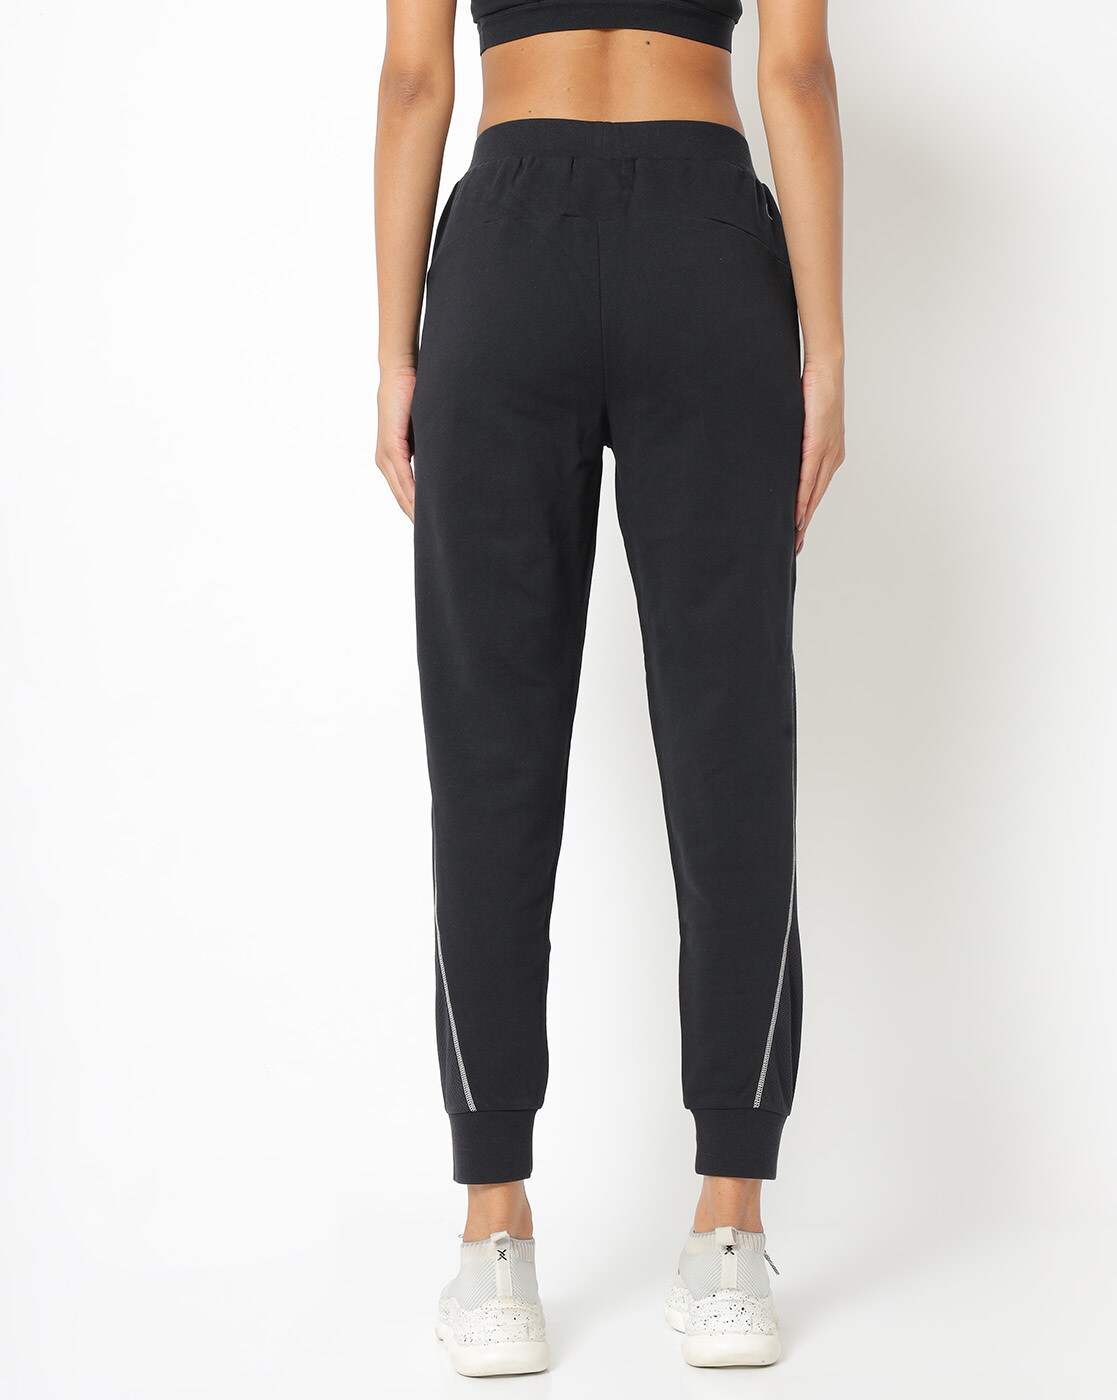 Buy Black Track Pants for Women by Calvin Klein Jeans Online